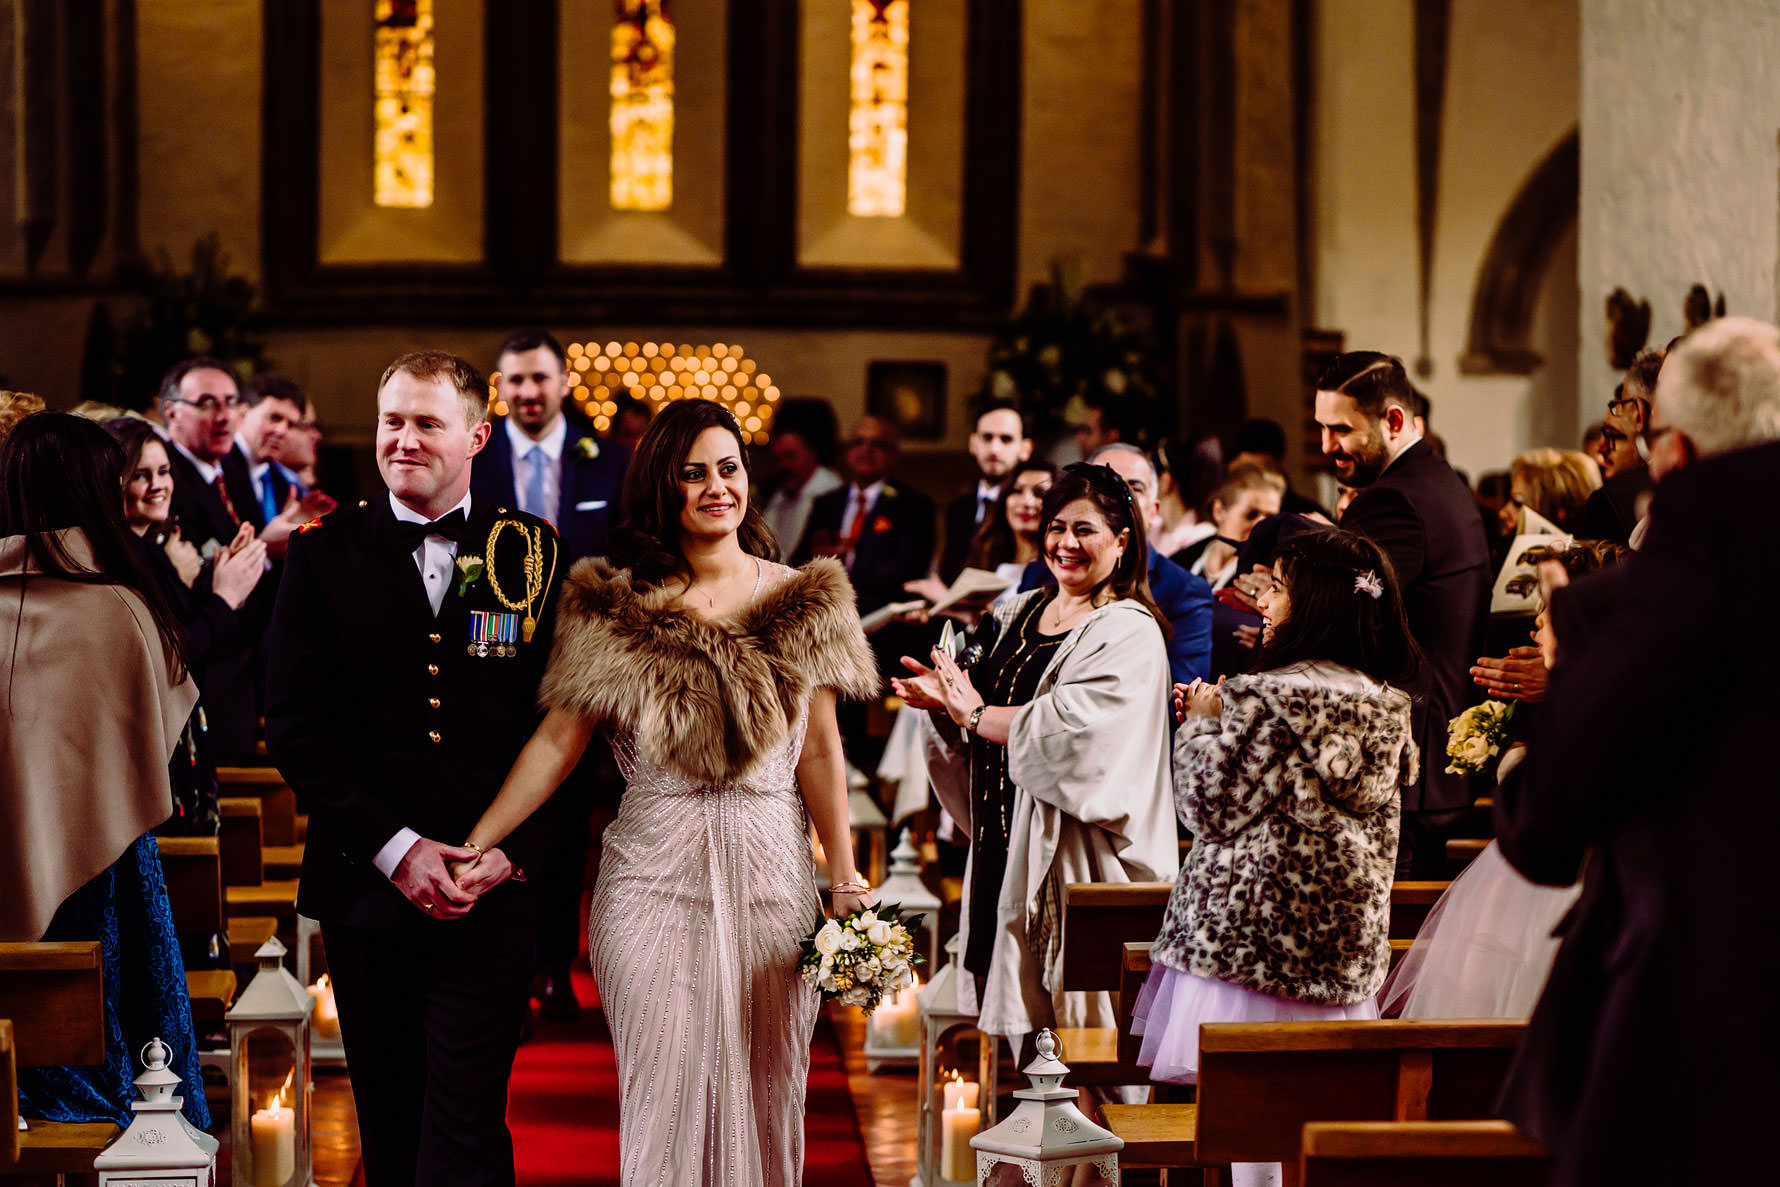 walking up the aisle as husband and wife